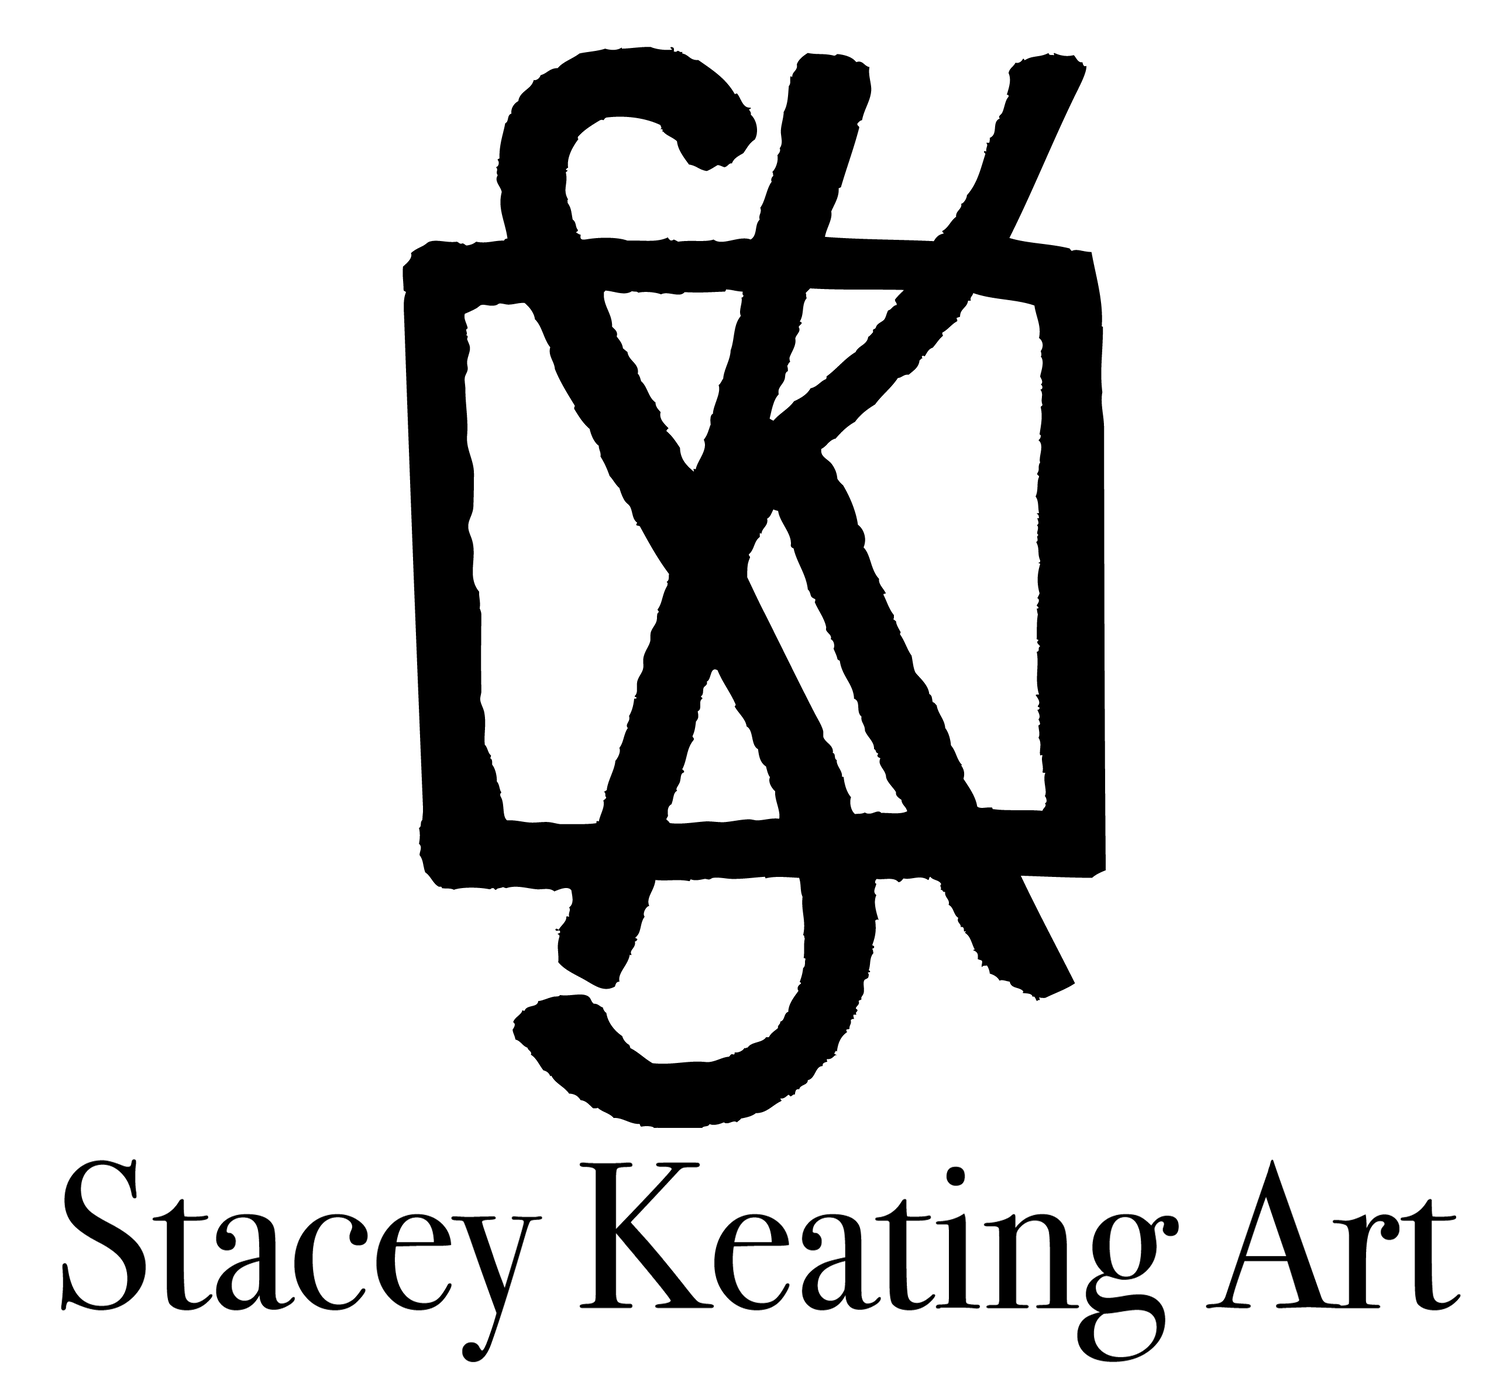 Stacey Keating Art